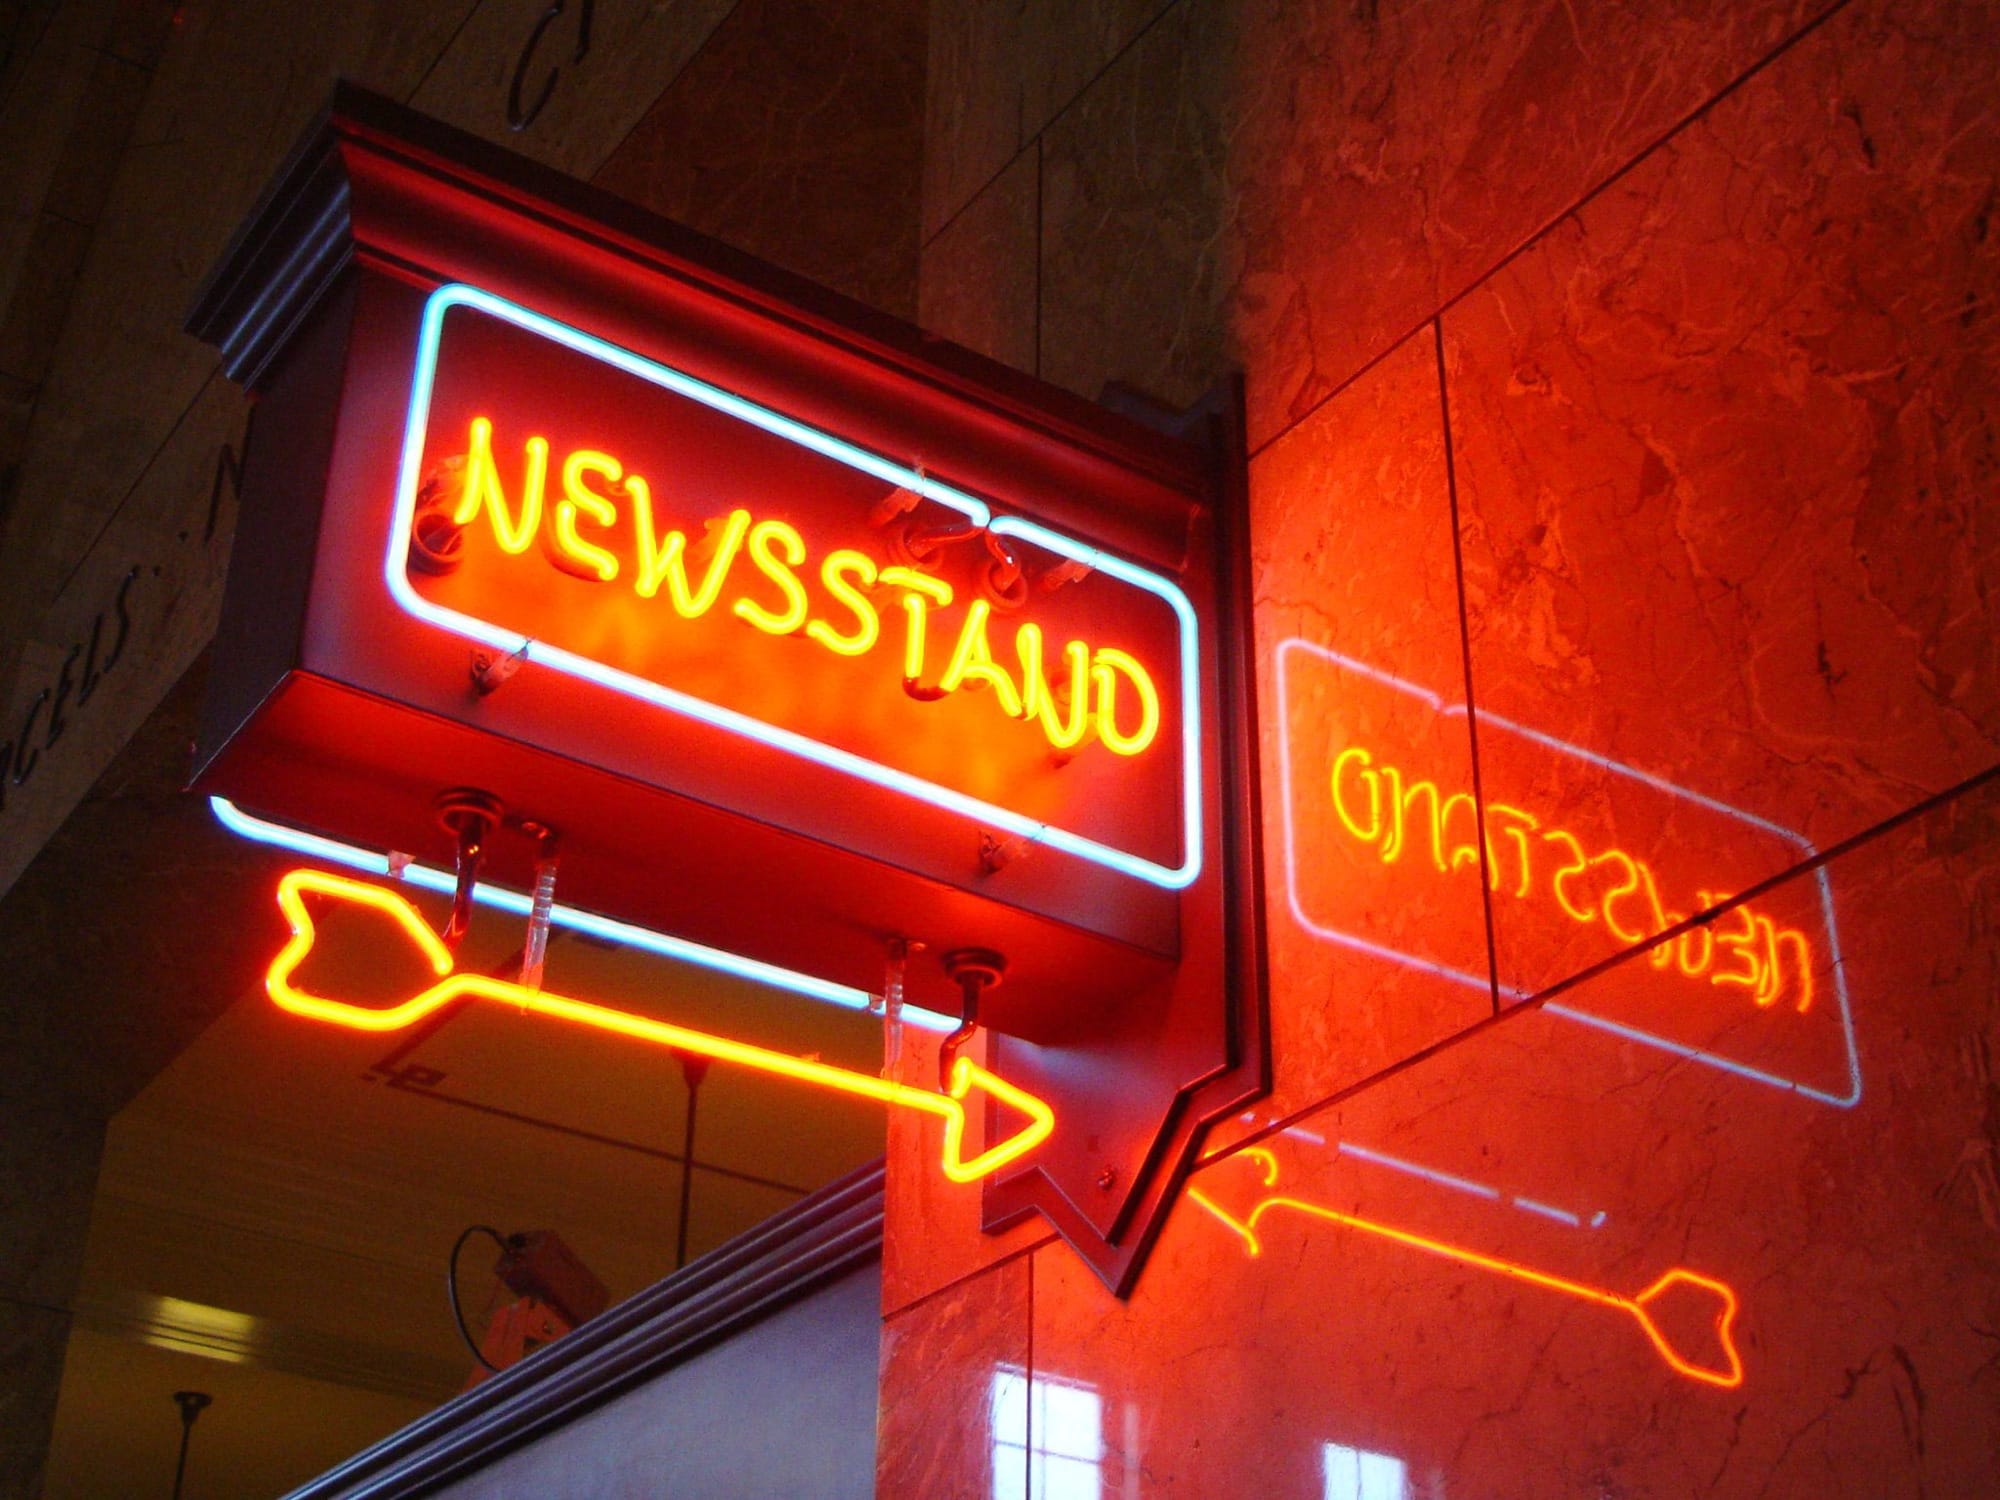 Can News+ succeed where Newsstand failed?